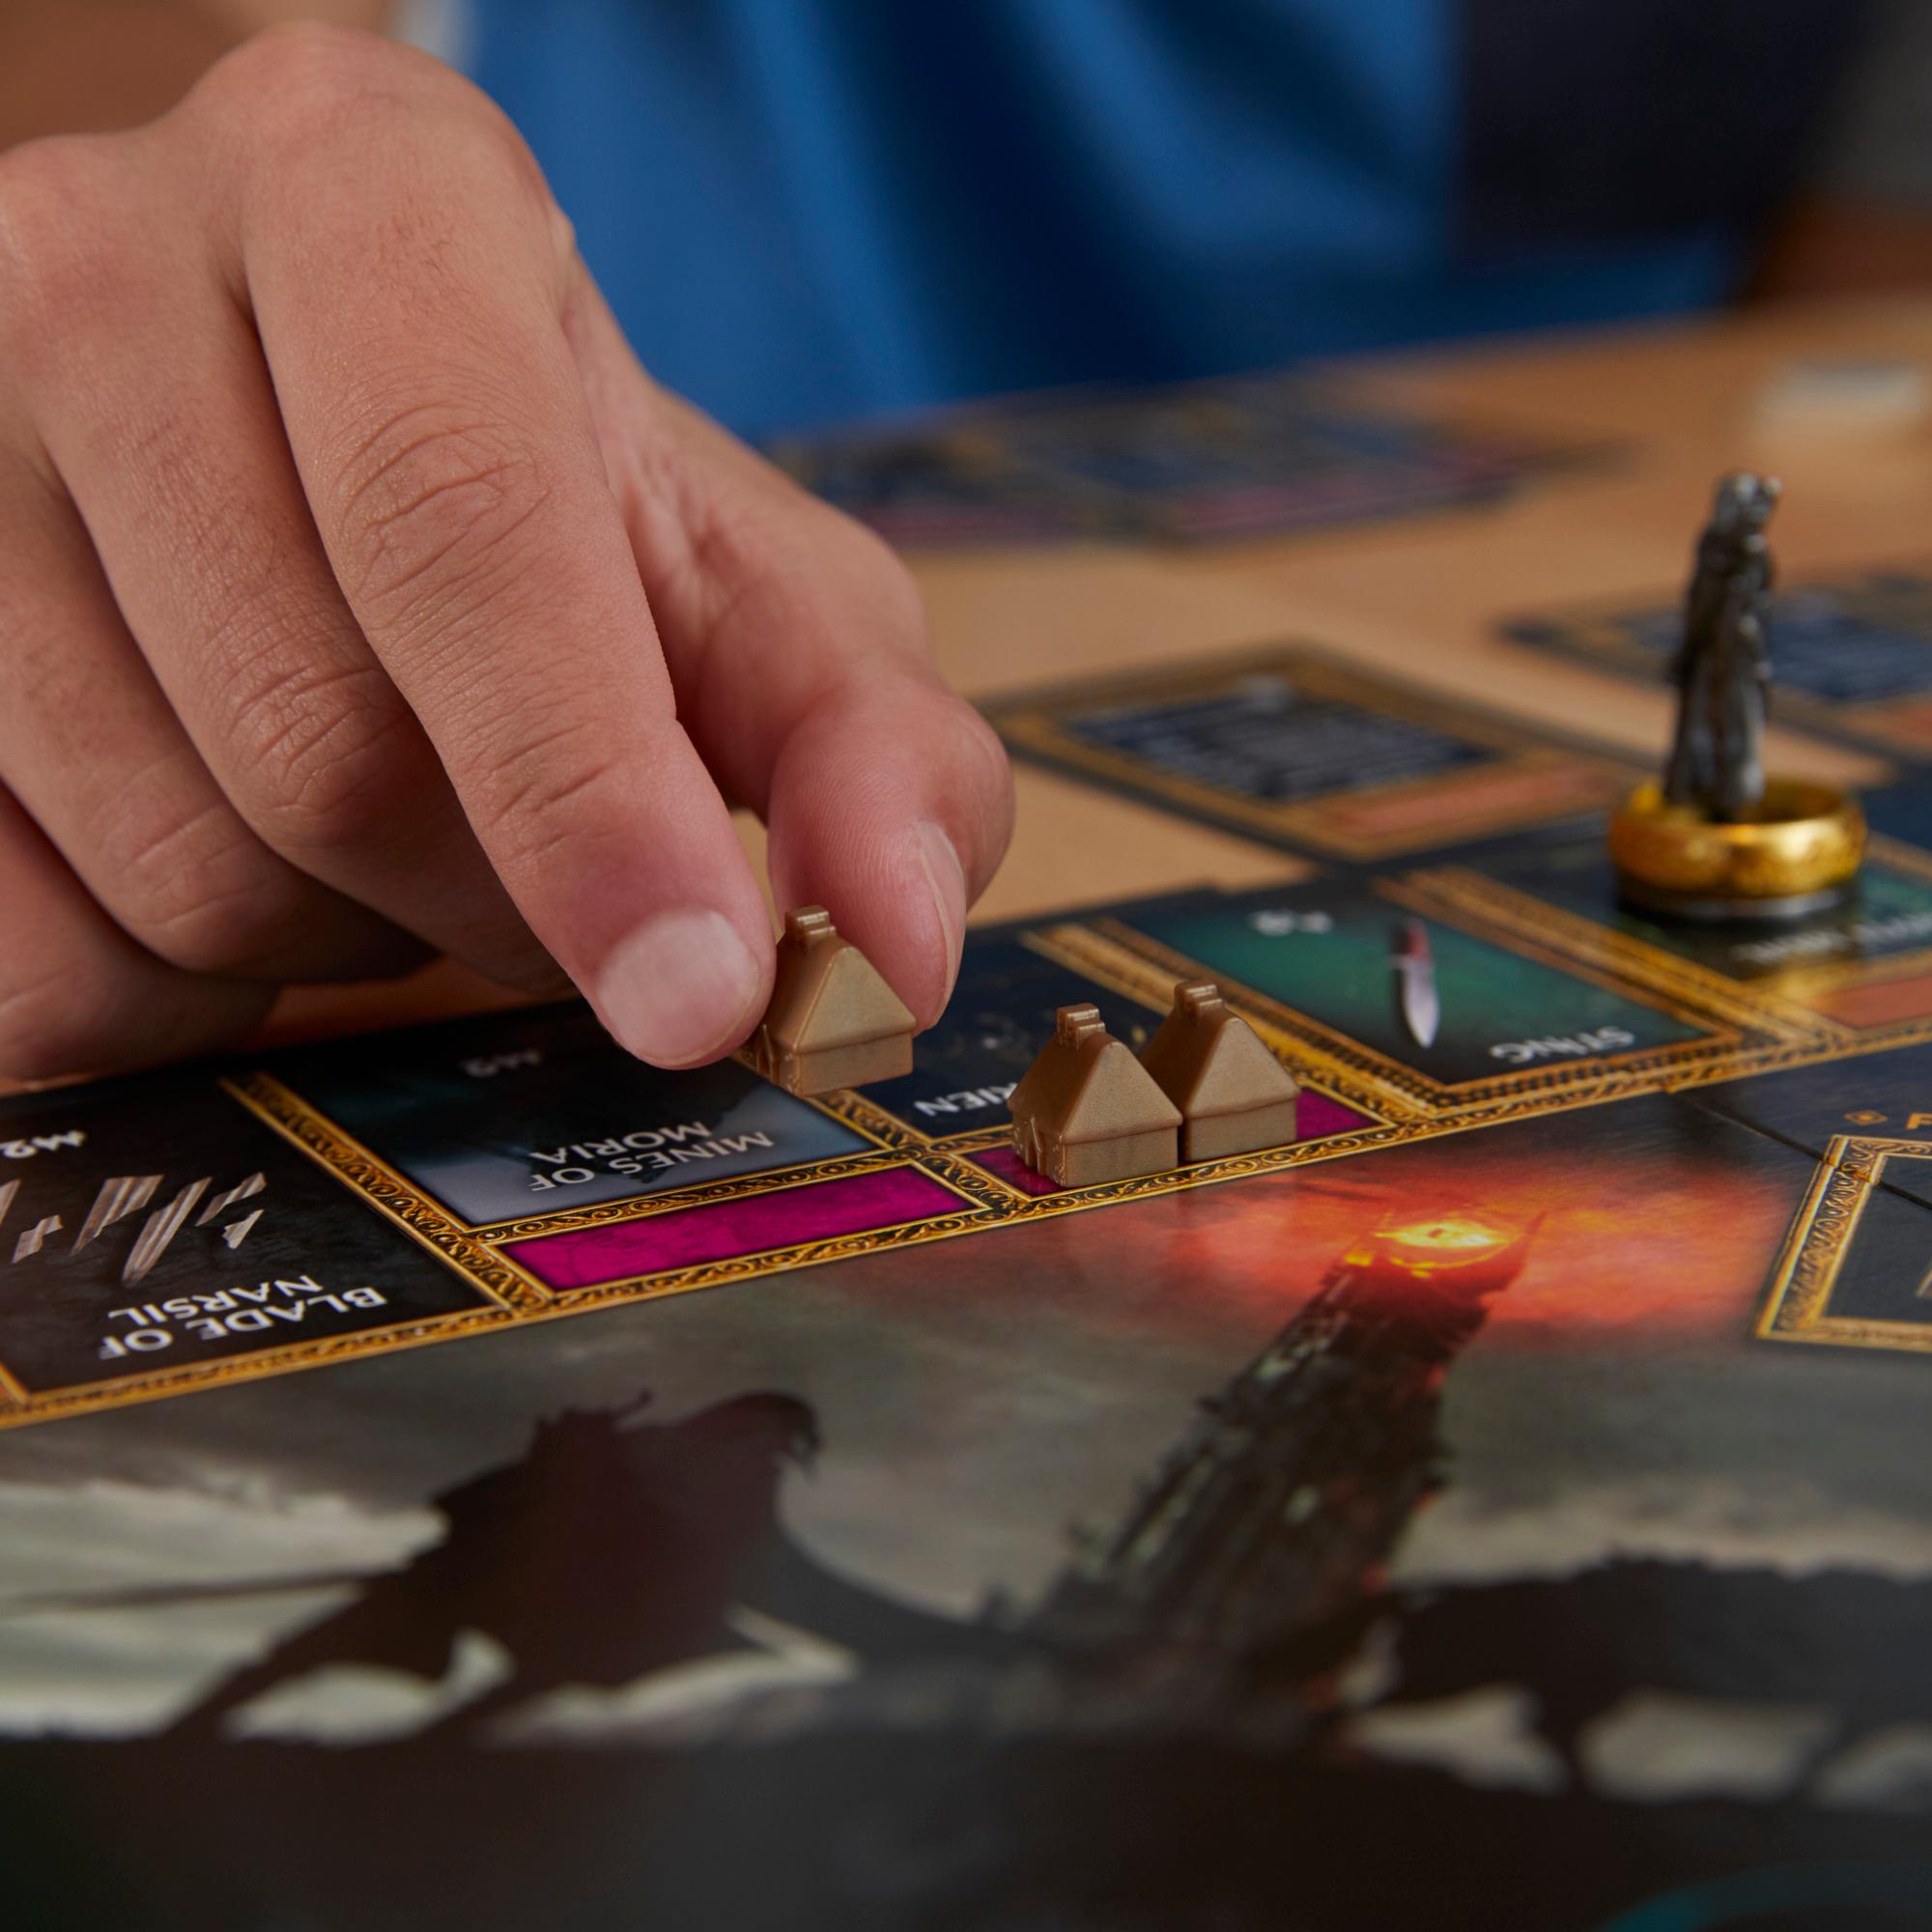  Hasbro Gaming Monopoly: The Lord of The Rings Edition Board  Game Inspired by The Movie Trilogy, Play as a Member of The Fellowship, for  Kids Ages 8 and Up ( Exclusive) 